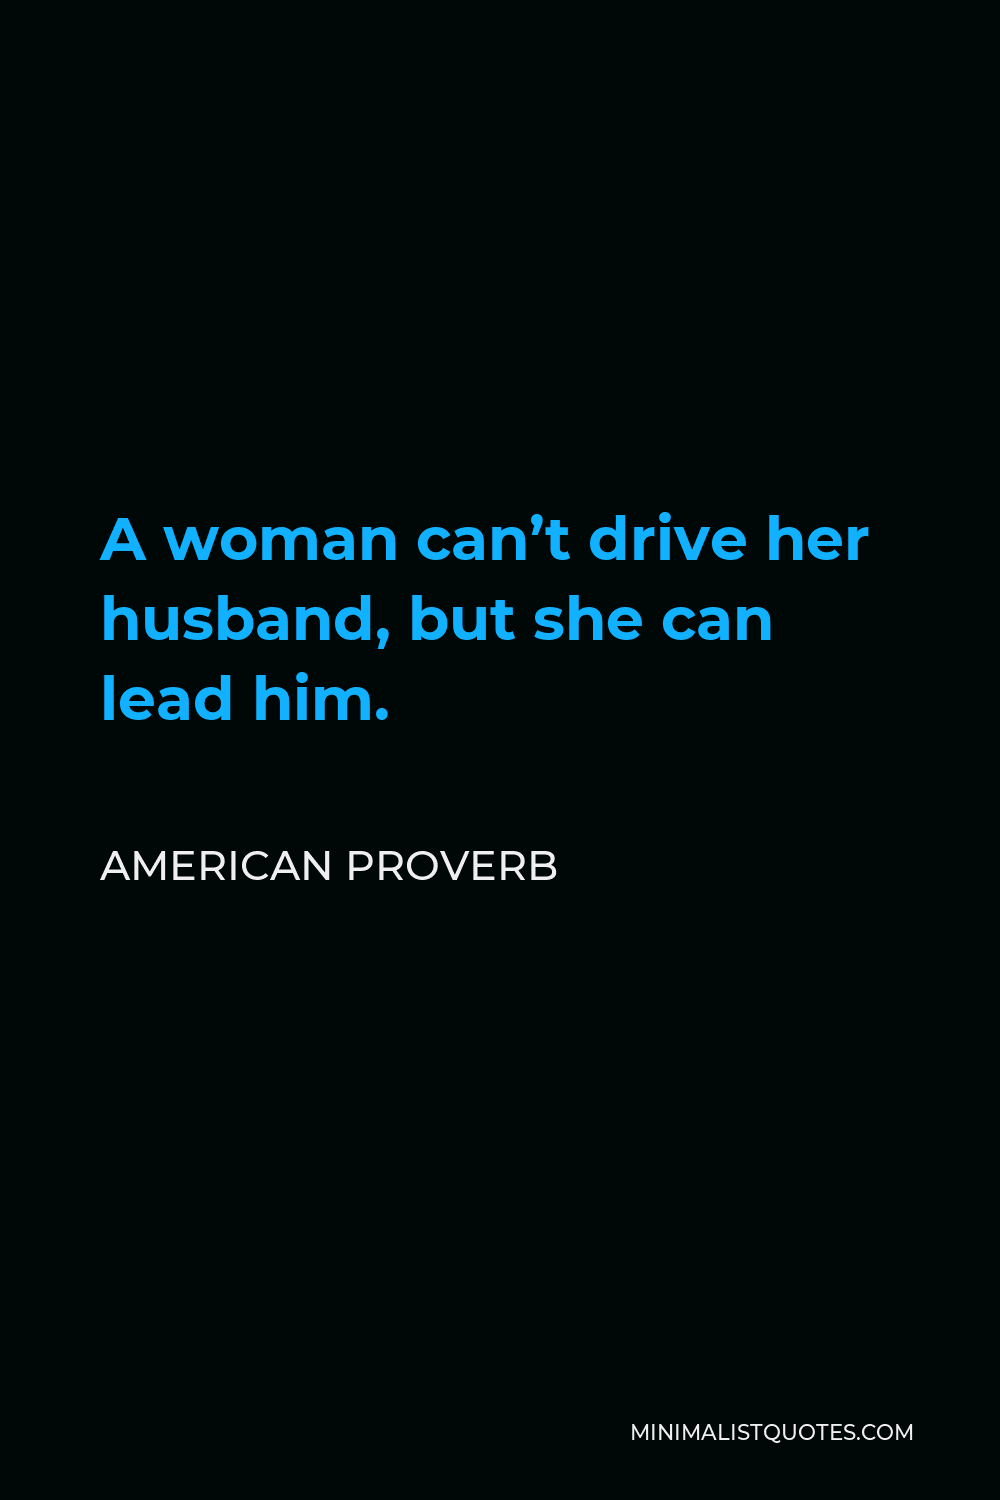 American Proverb Quote - A woman can’t drive her husband, but she can lead him.